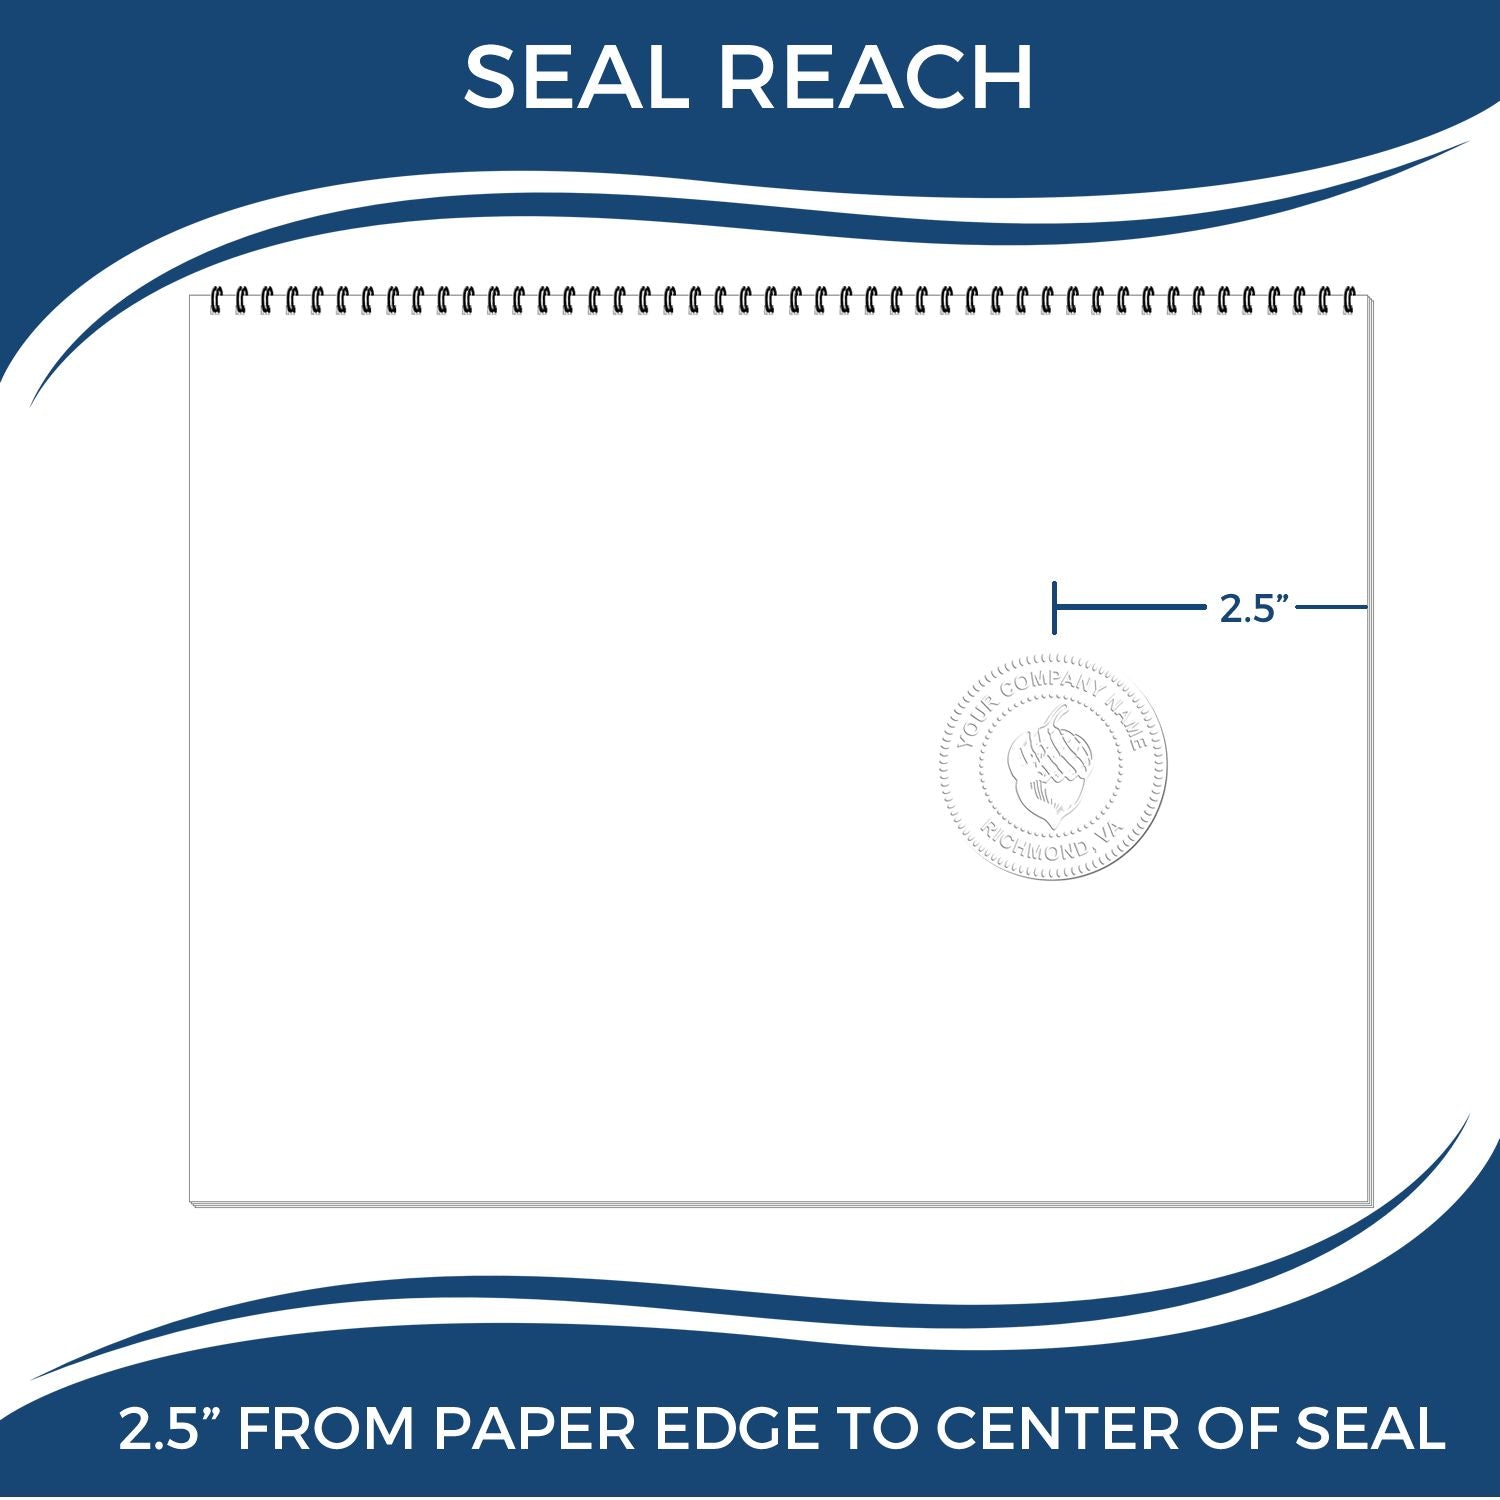 An infographic showing the seal reach which is represented by a ruler and a miniature seal image of the Long Reach Arkansas PE Seal